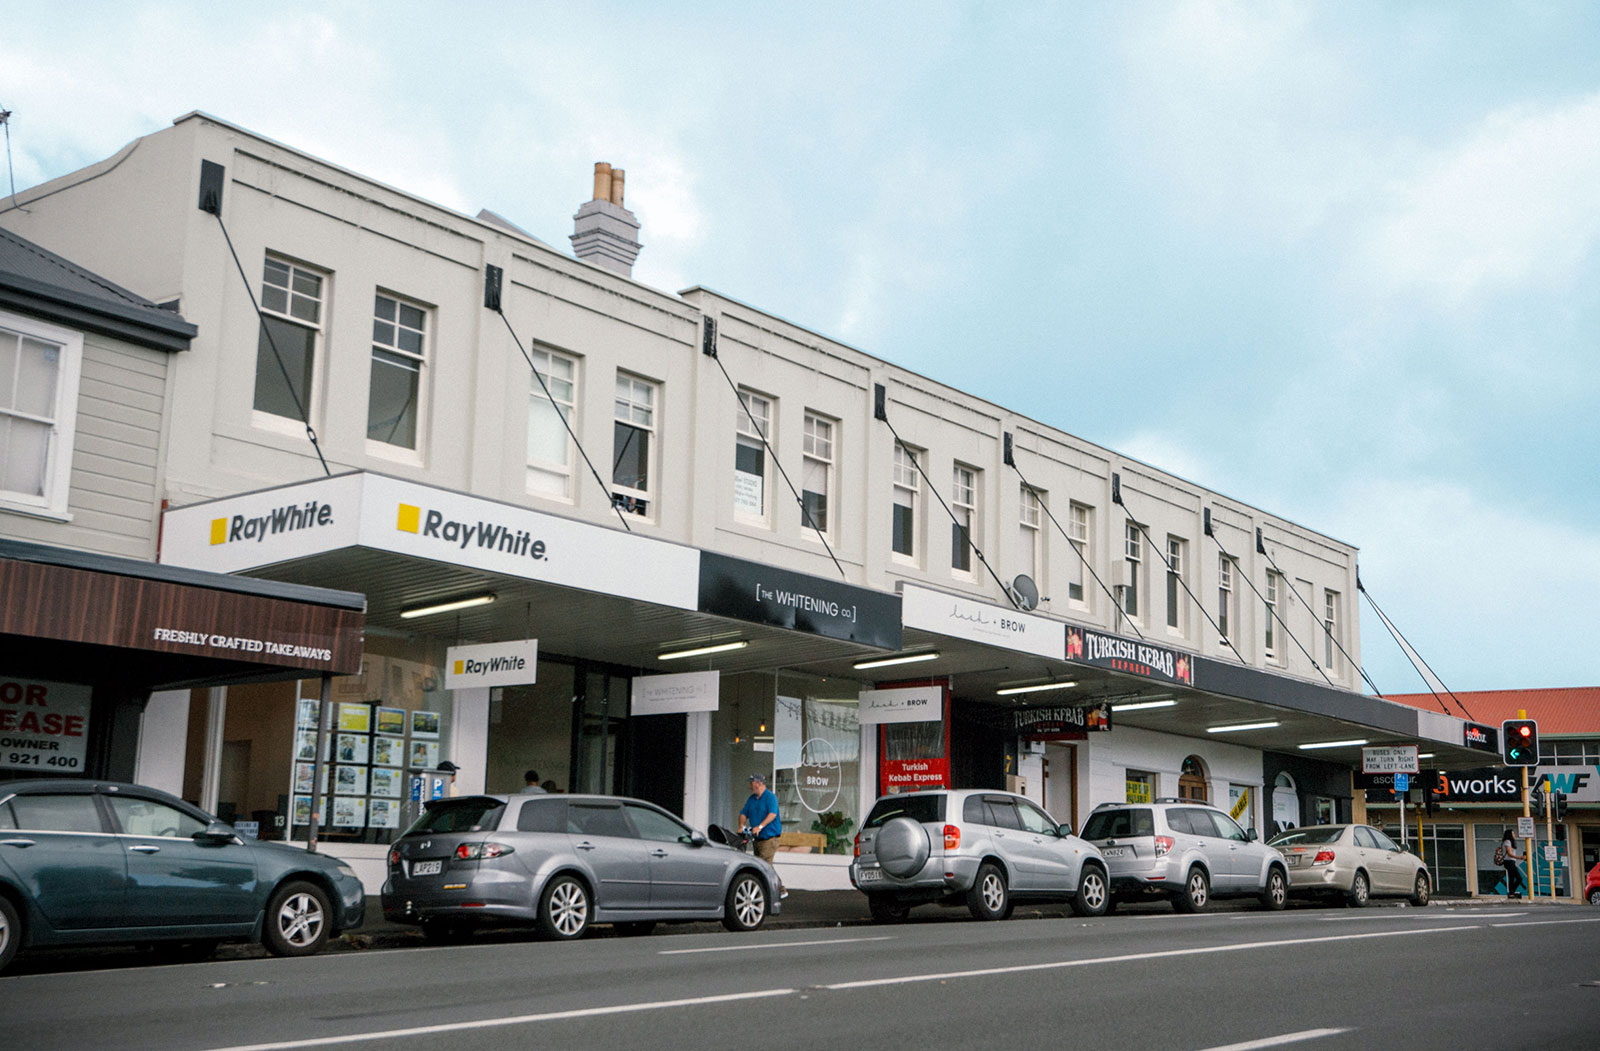 Lease Real Estate Auckland - Retail Property